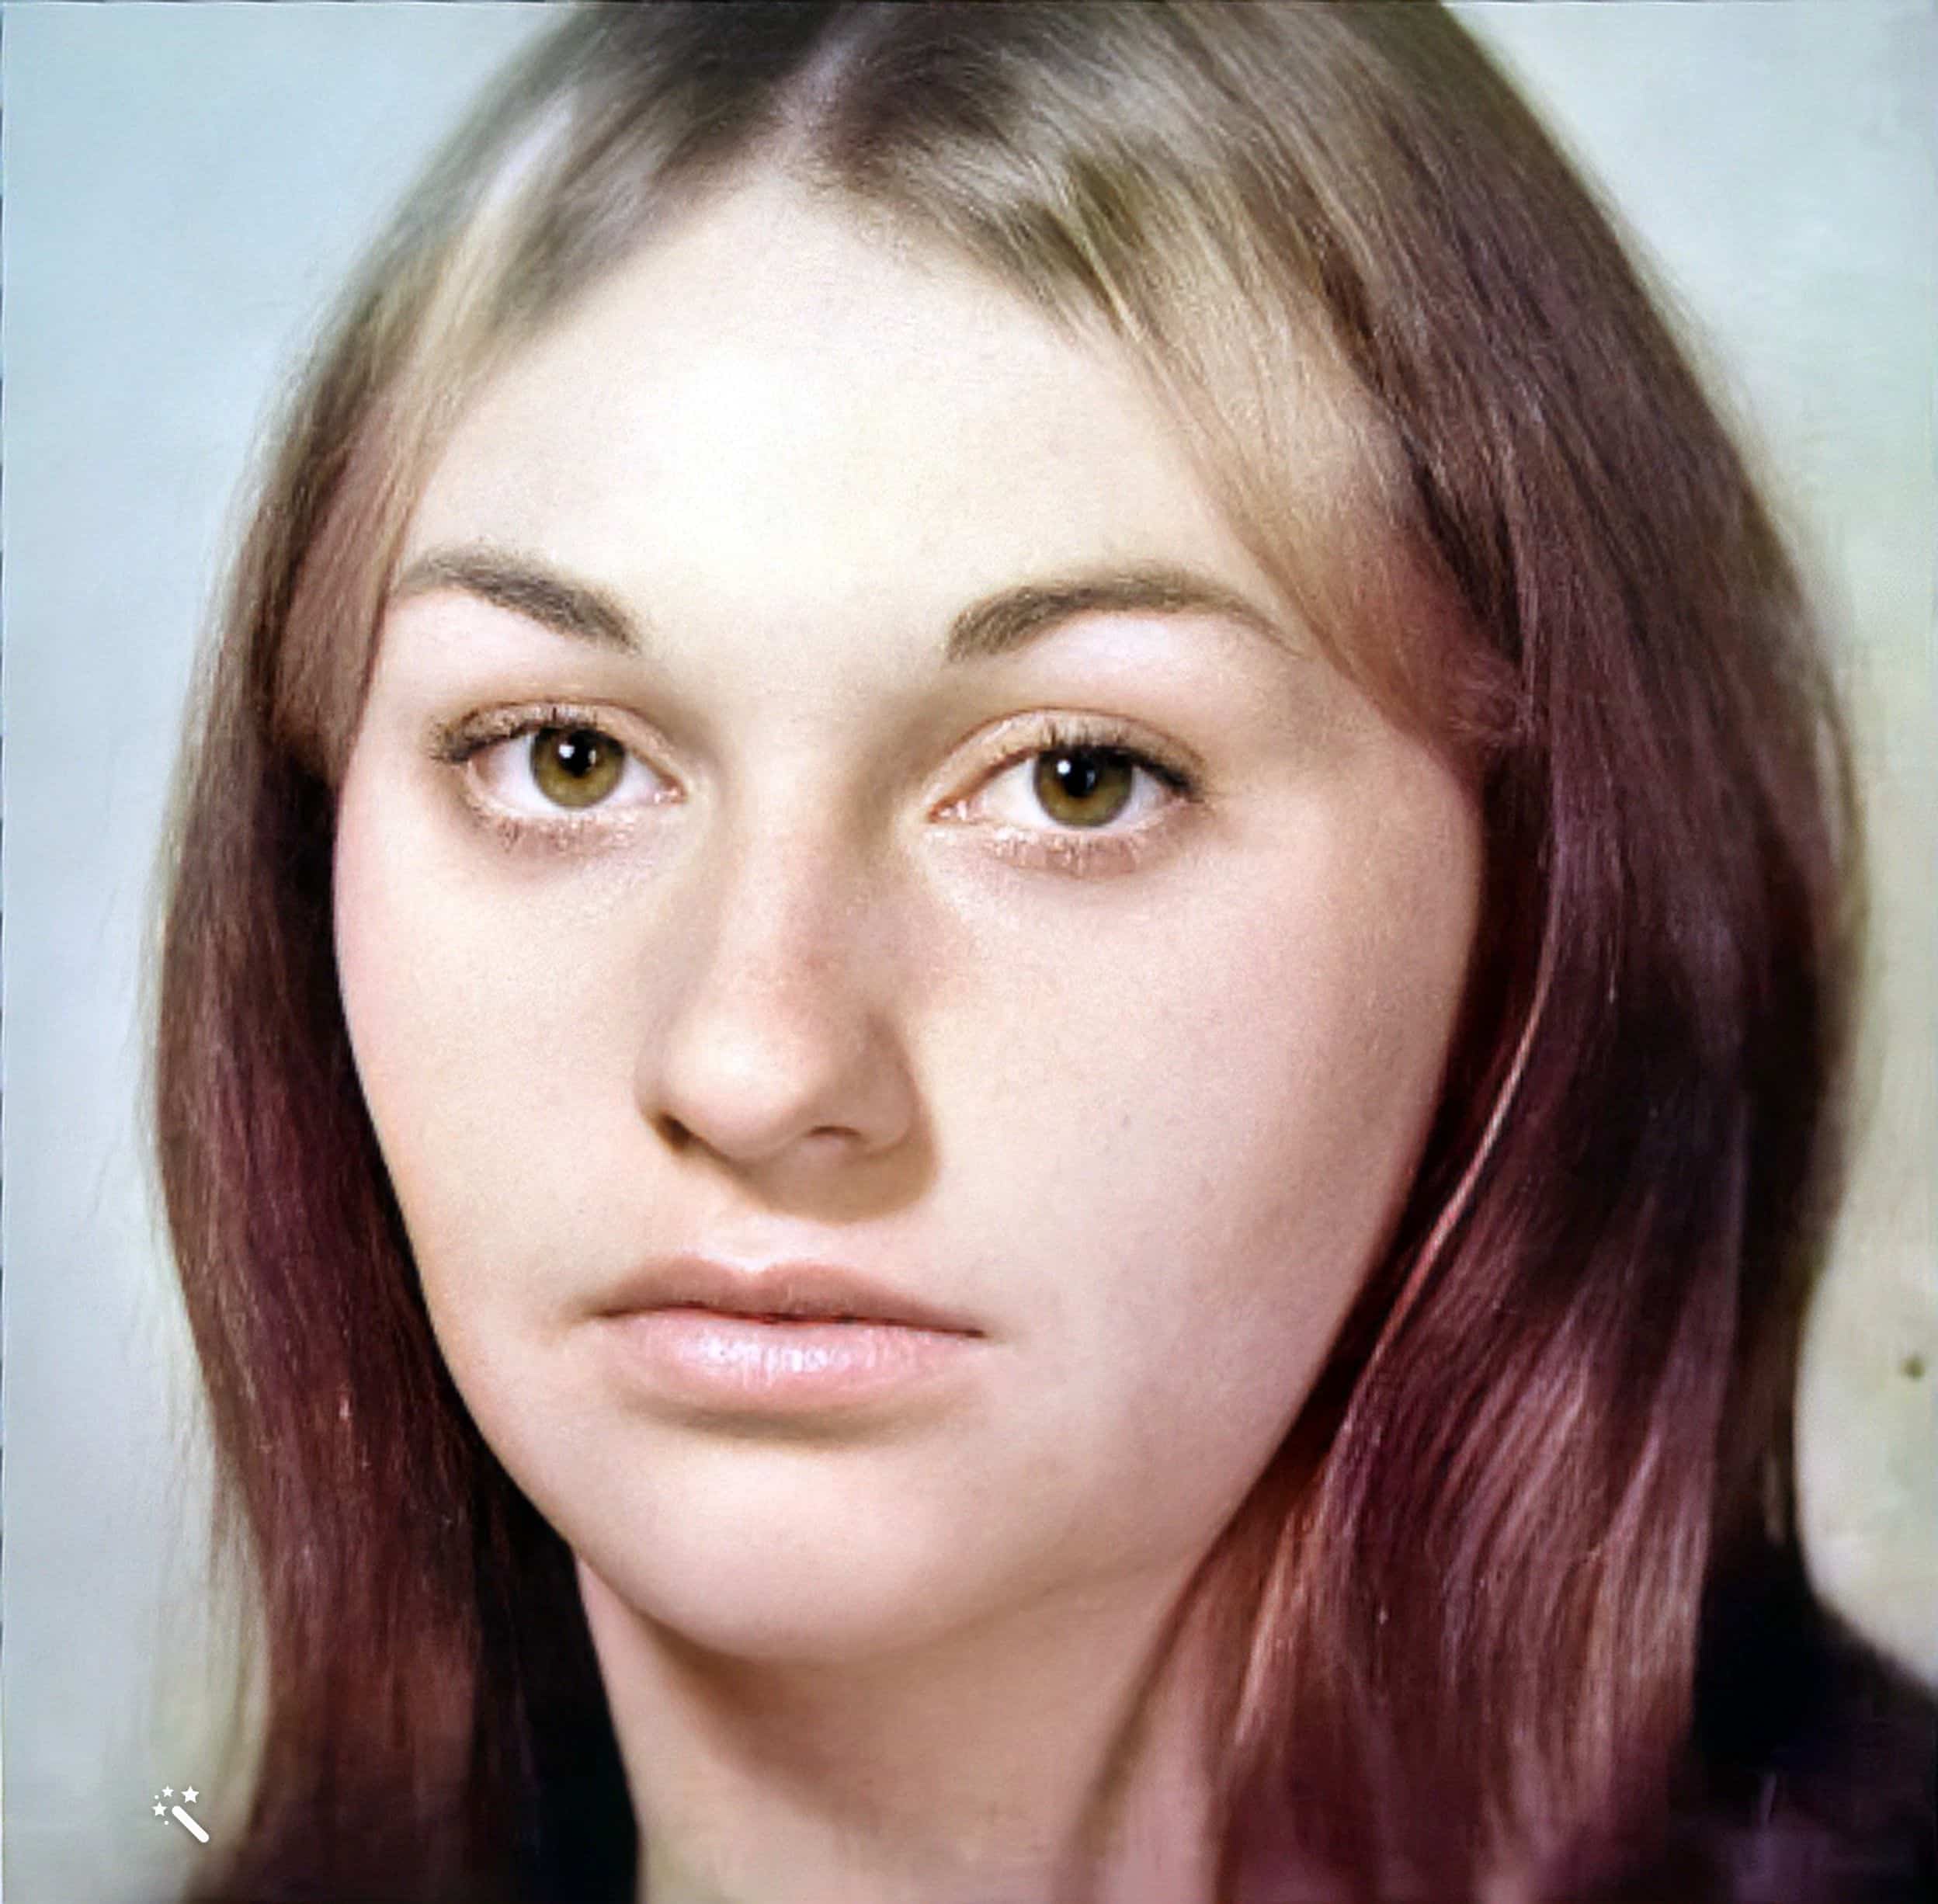 Angela at 18. Photo enhanced and colors restored by MyHeritage